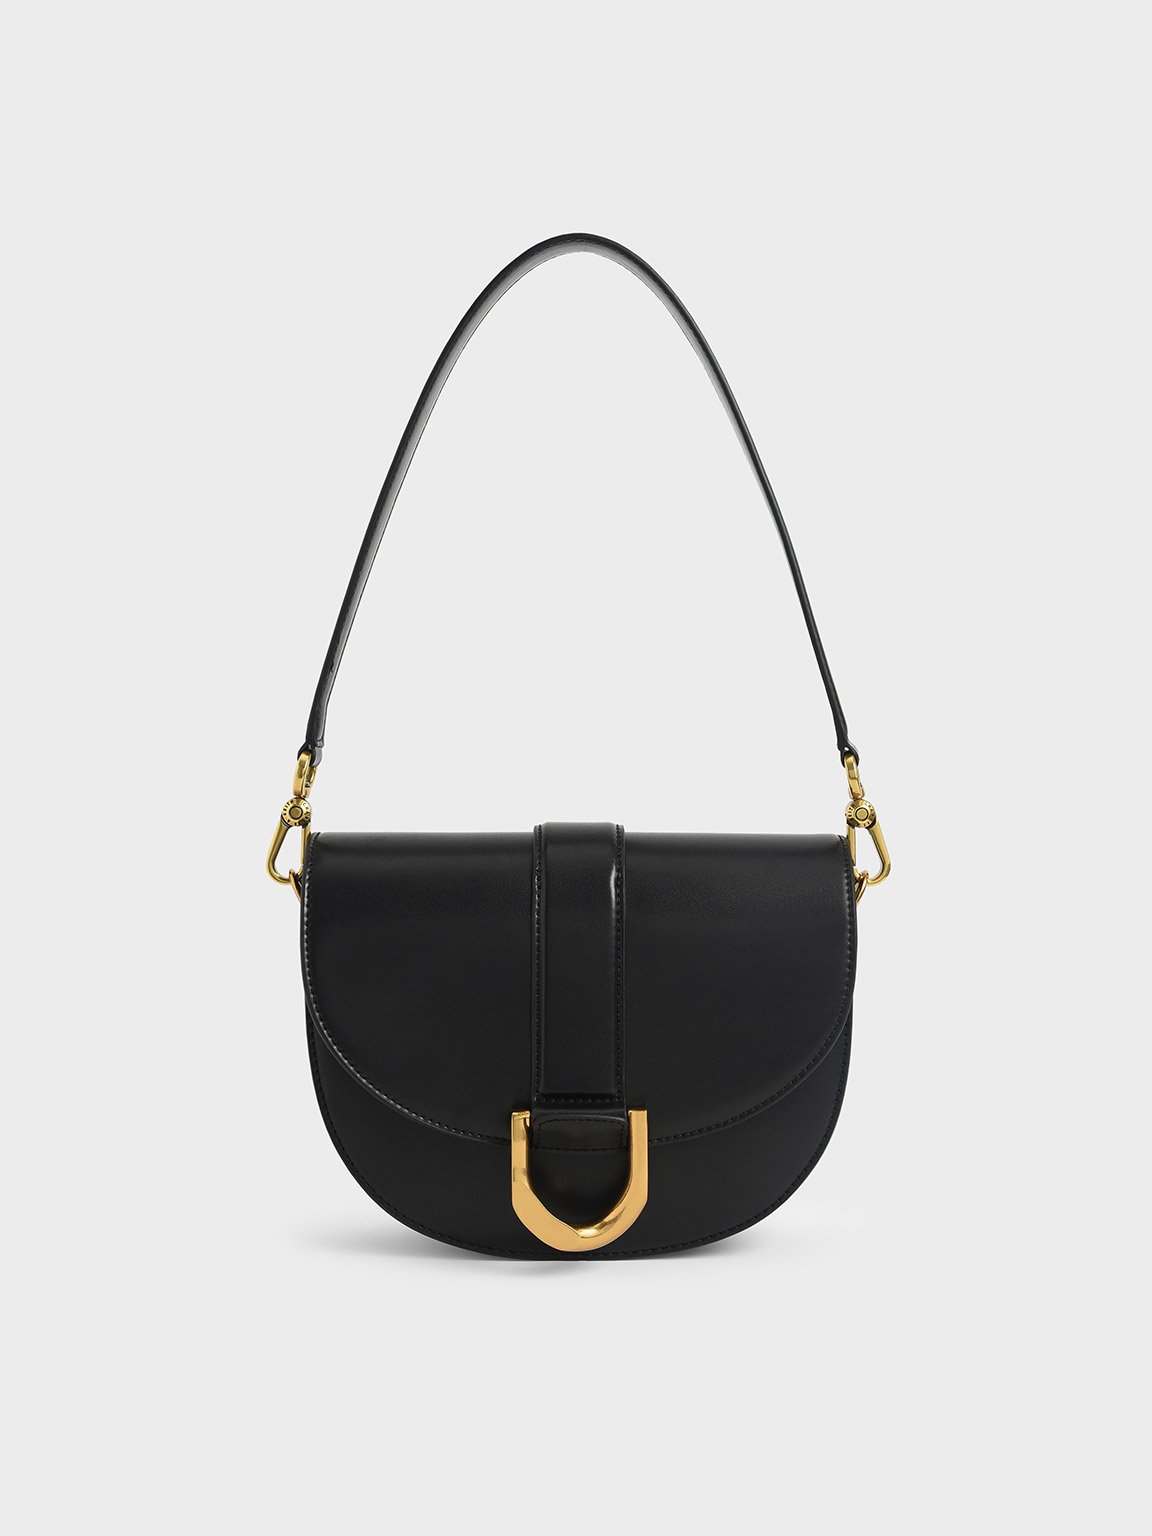 Buy Dior Saddle Bags Online In India -  India